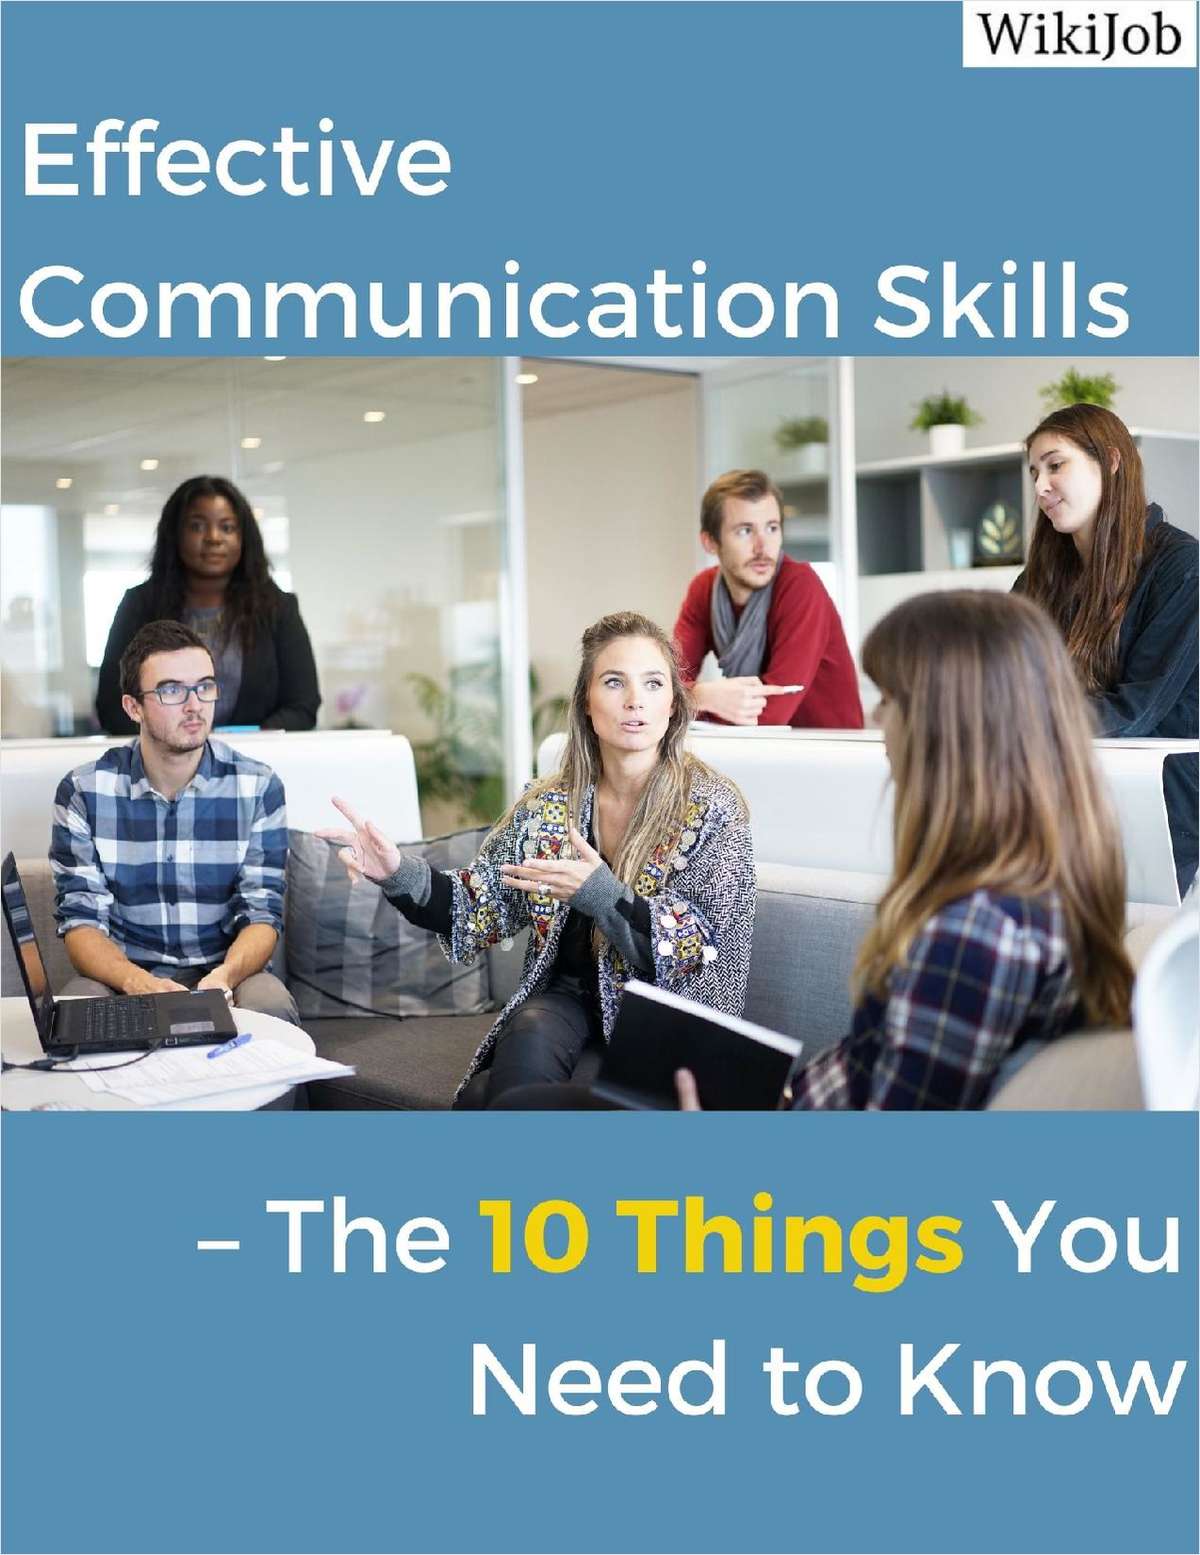 Effective Communication Skills -- The 10 Things You Need to Know